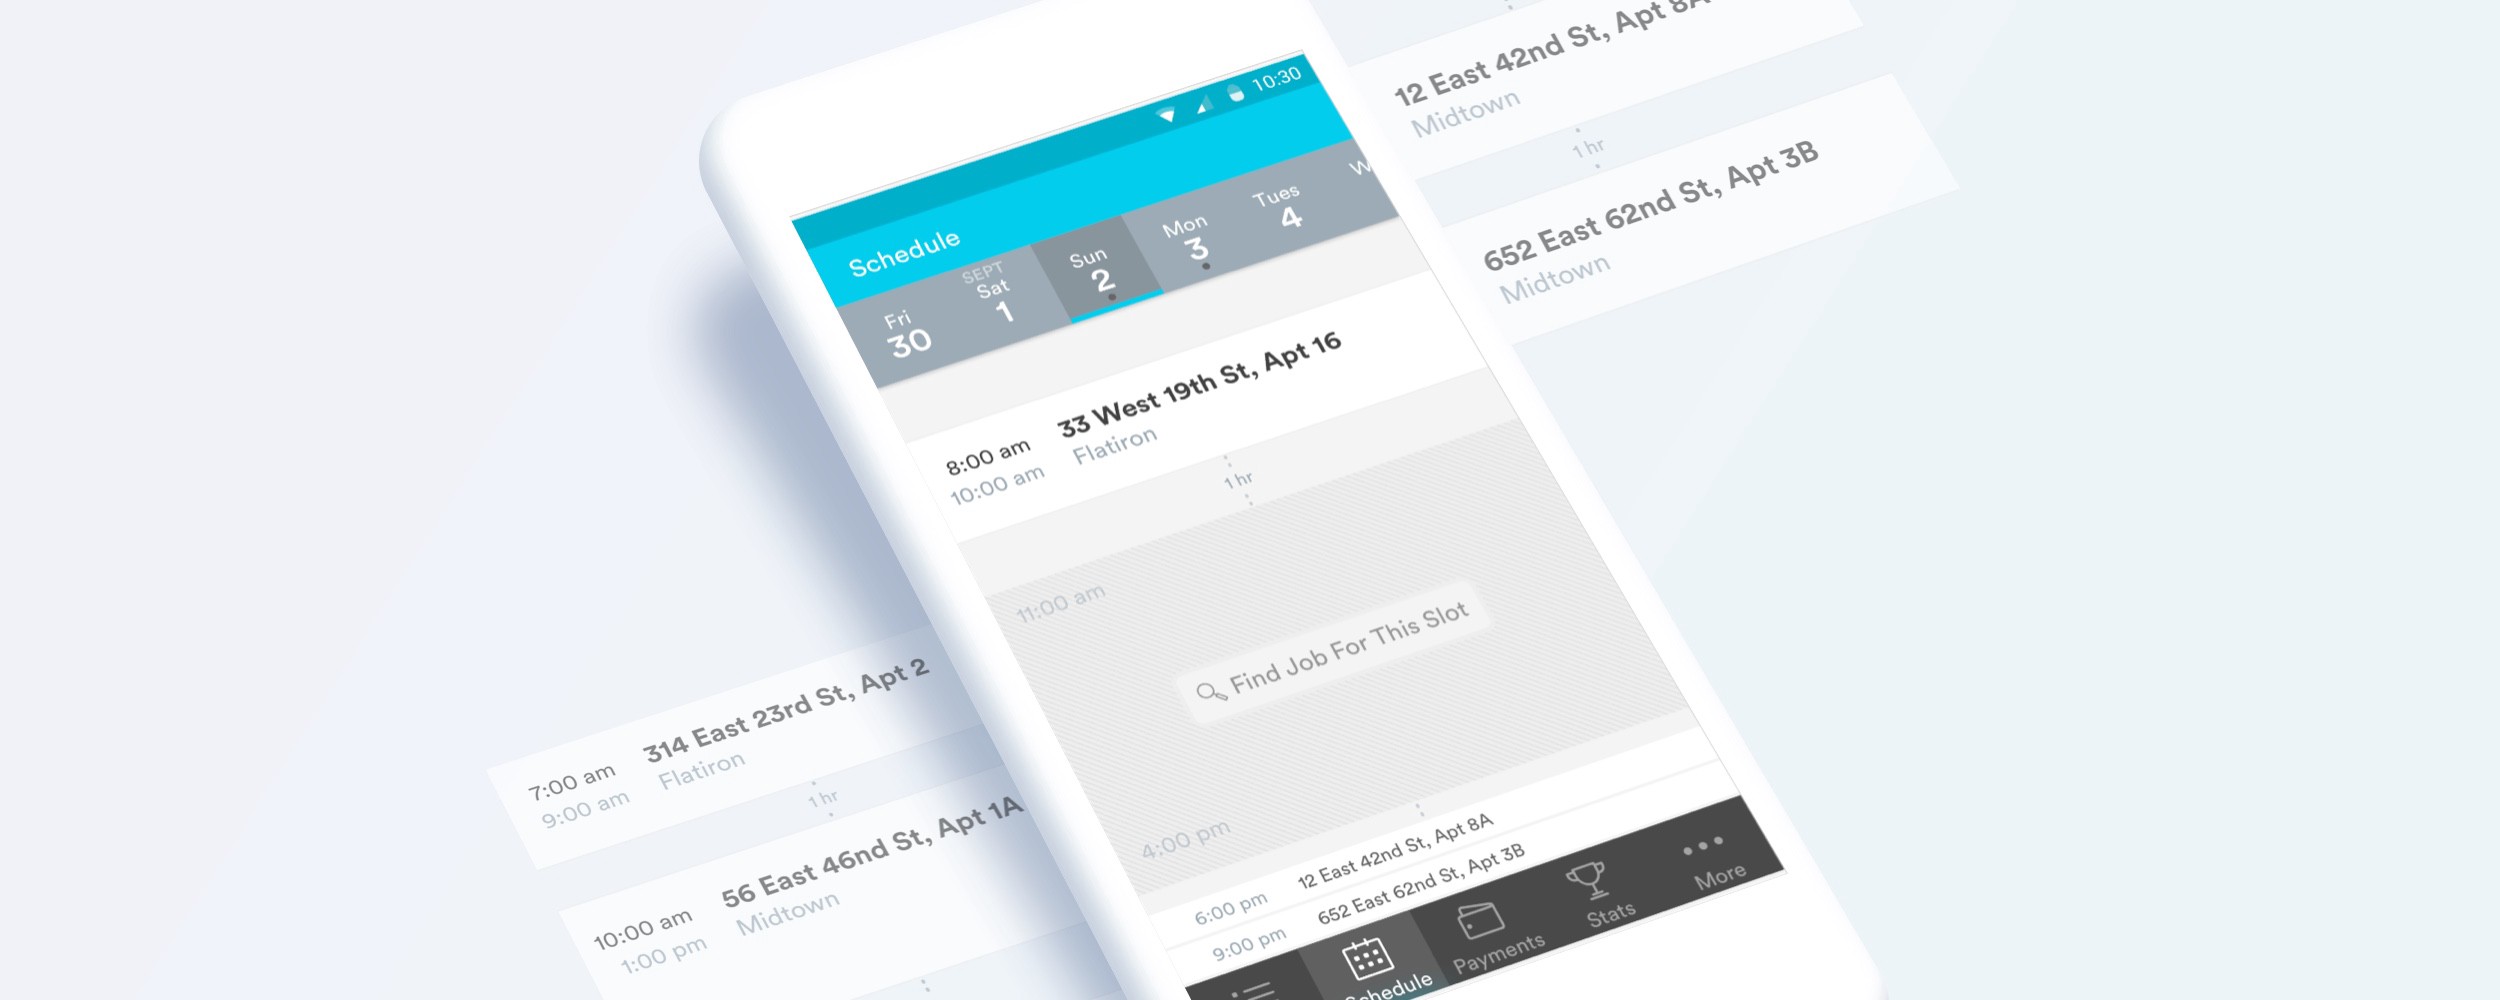 Scheduling app for business app ideas